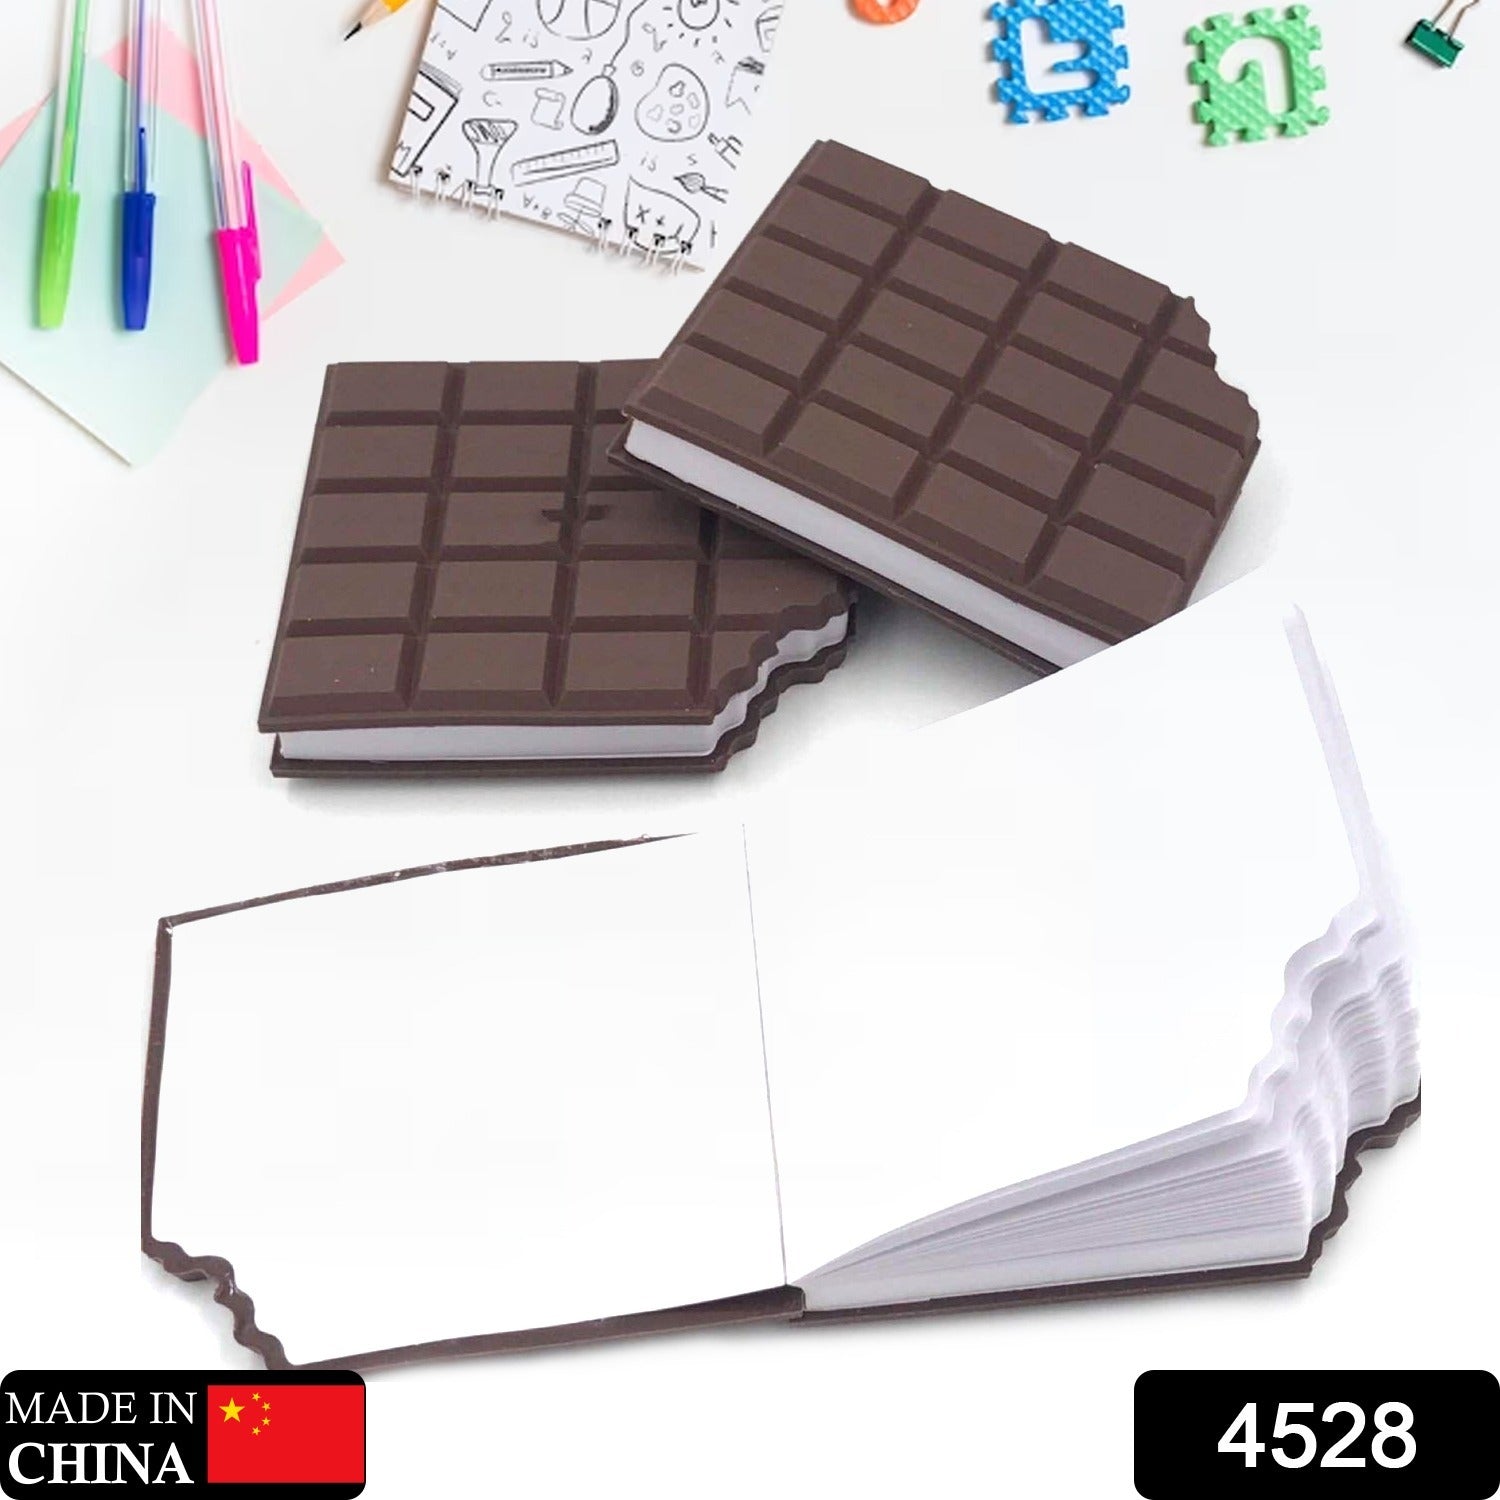 4528 Small Chocolate Scented Diary Memo Notebook in Rectangular Chocolate Bite Shape with Original Chocolate Smell Personal Pocket Diary with Plain Pages for Kids